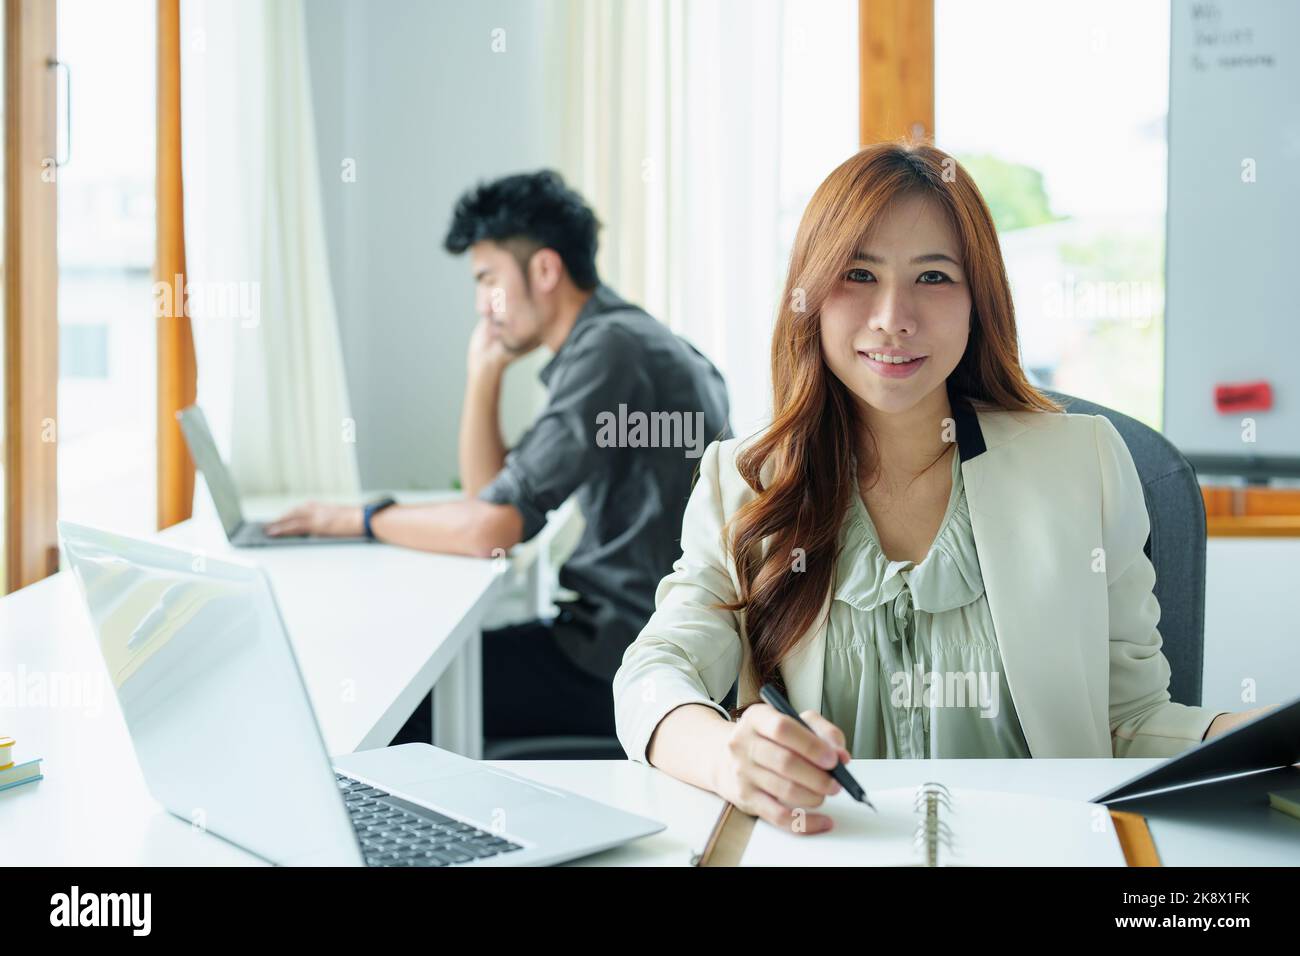 Portrait of an Asian bank employee using notebooks to take notes, budget documents and computers to close financial statements Stock Photo